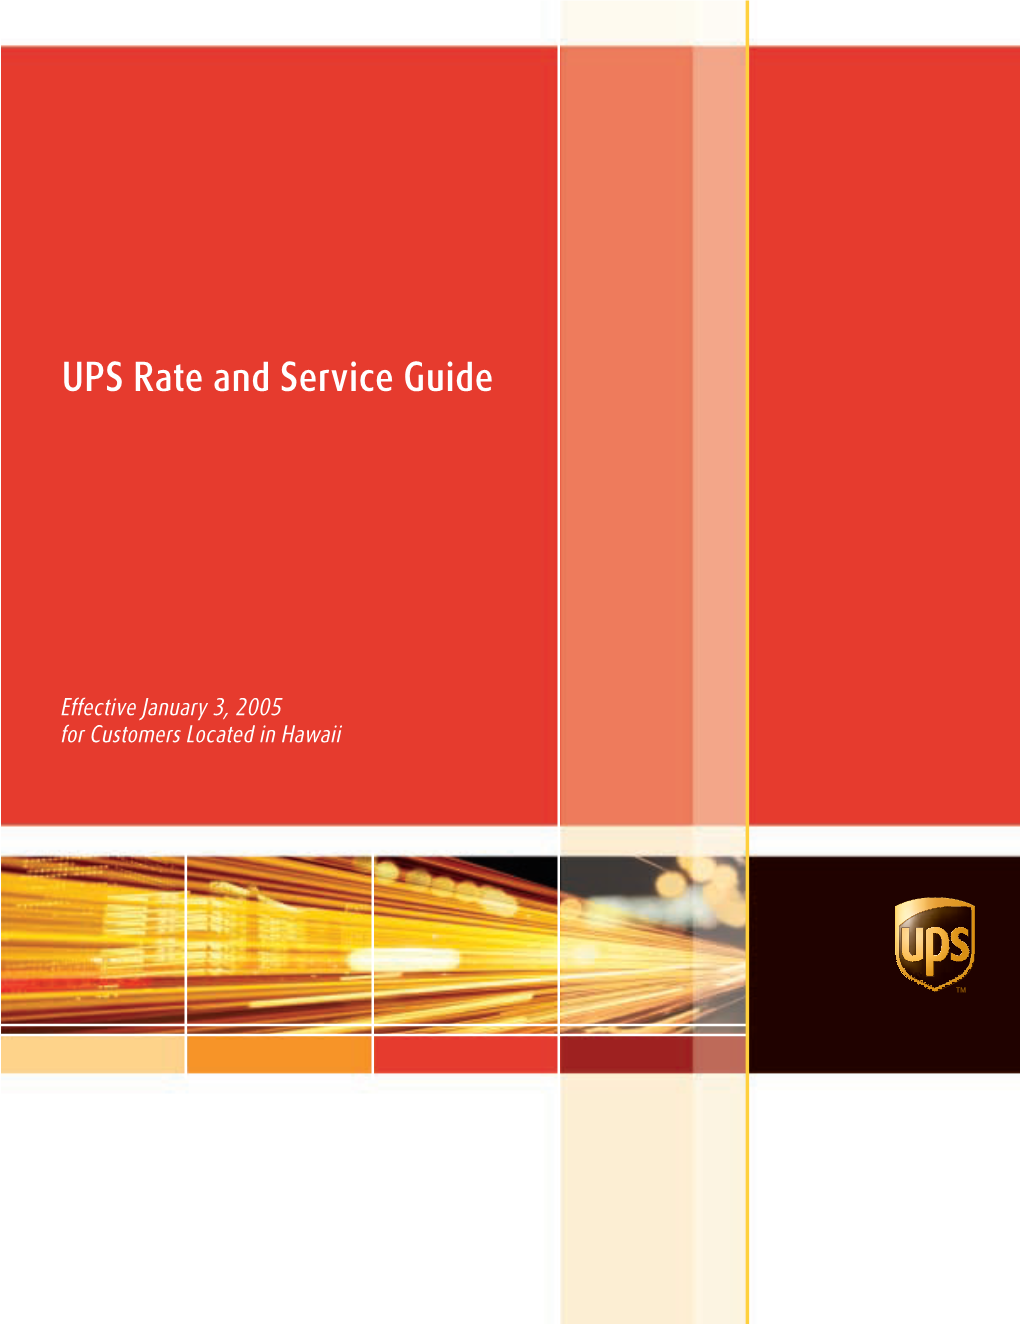 UPS Rate and Service Guide